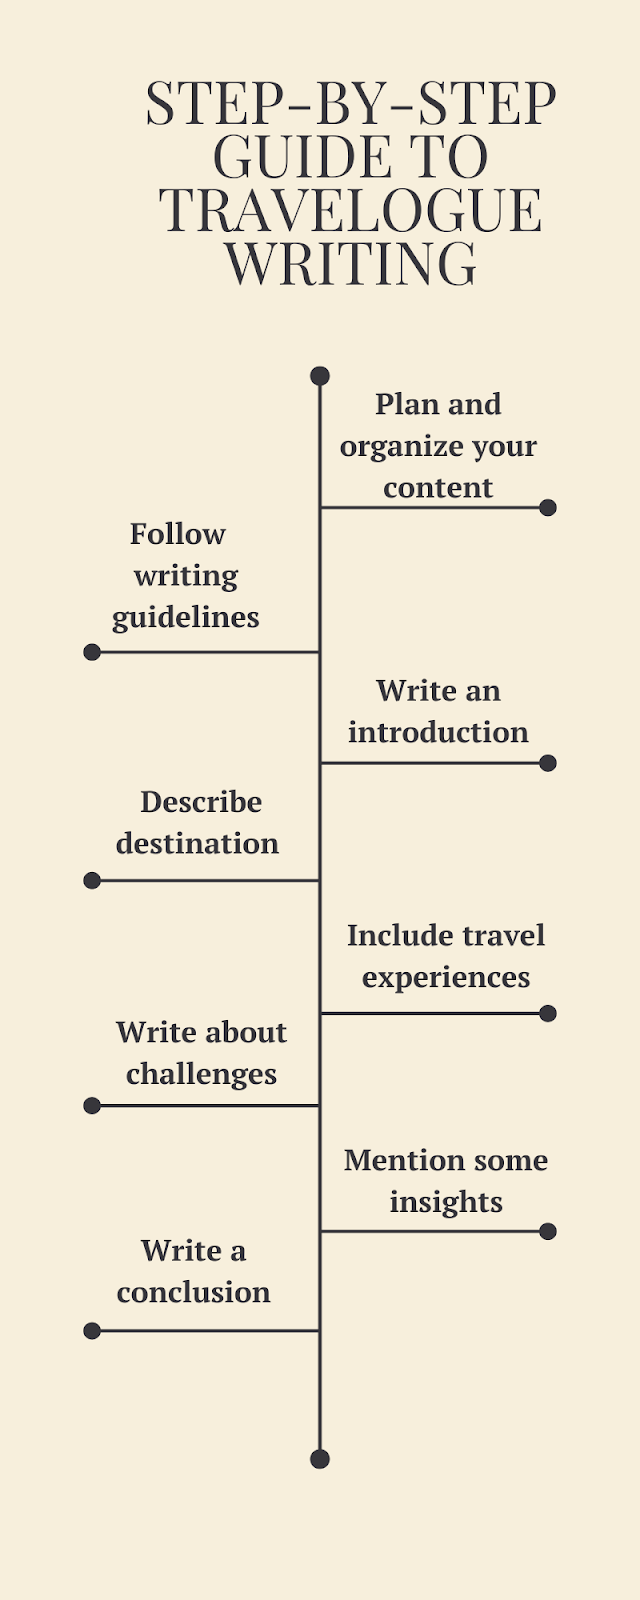 A step-by-step guide to travelogue writing